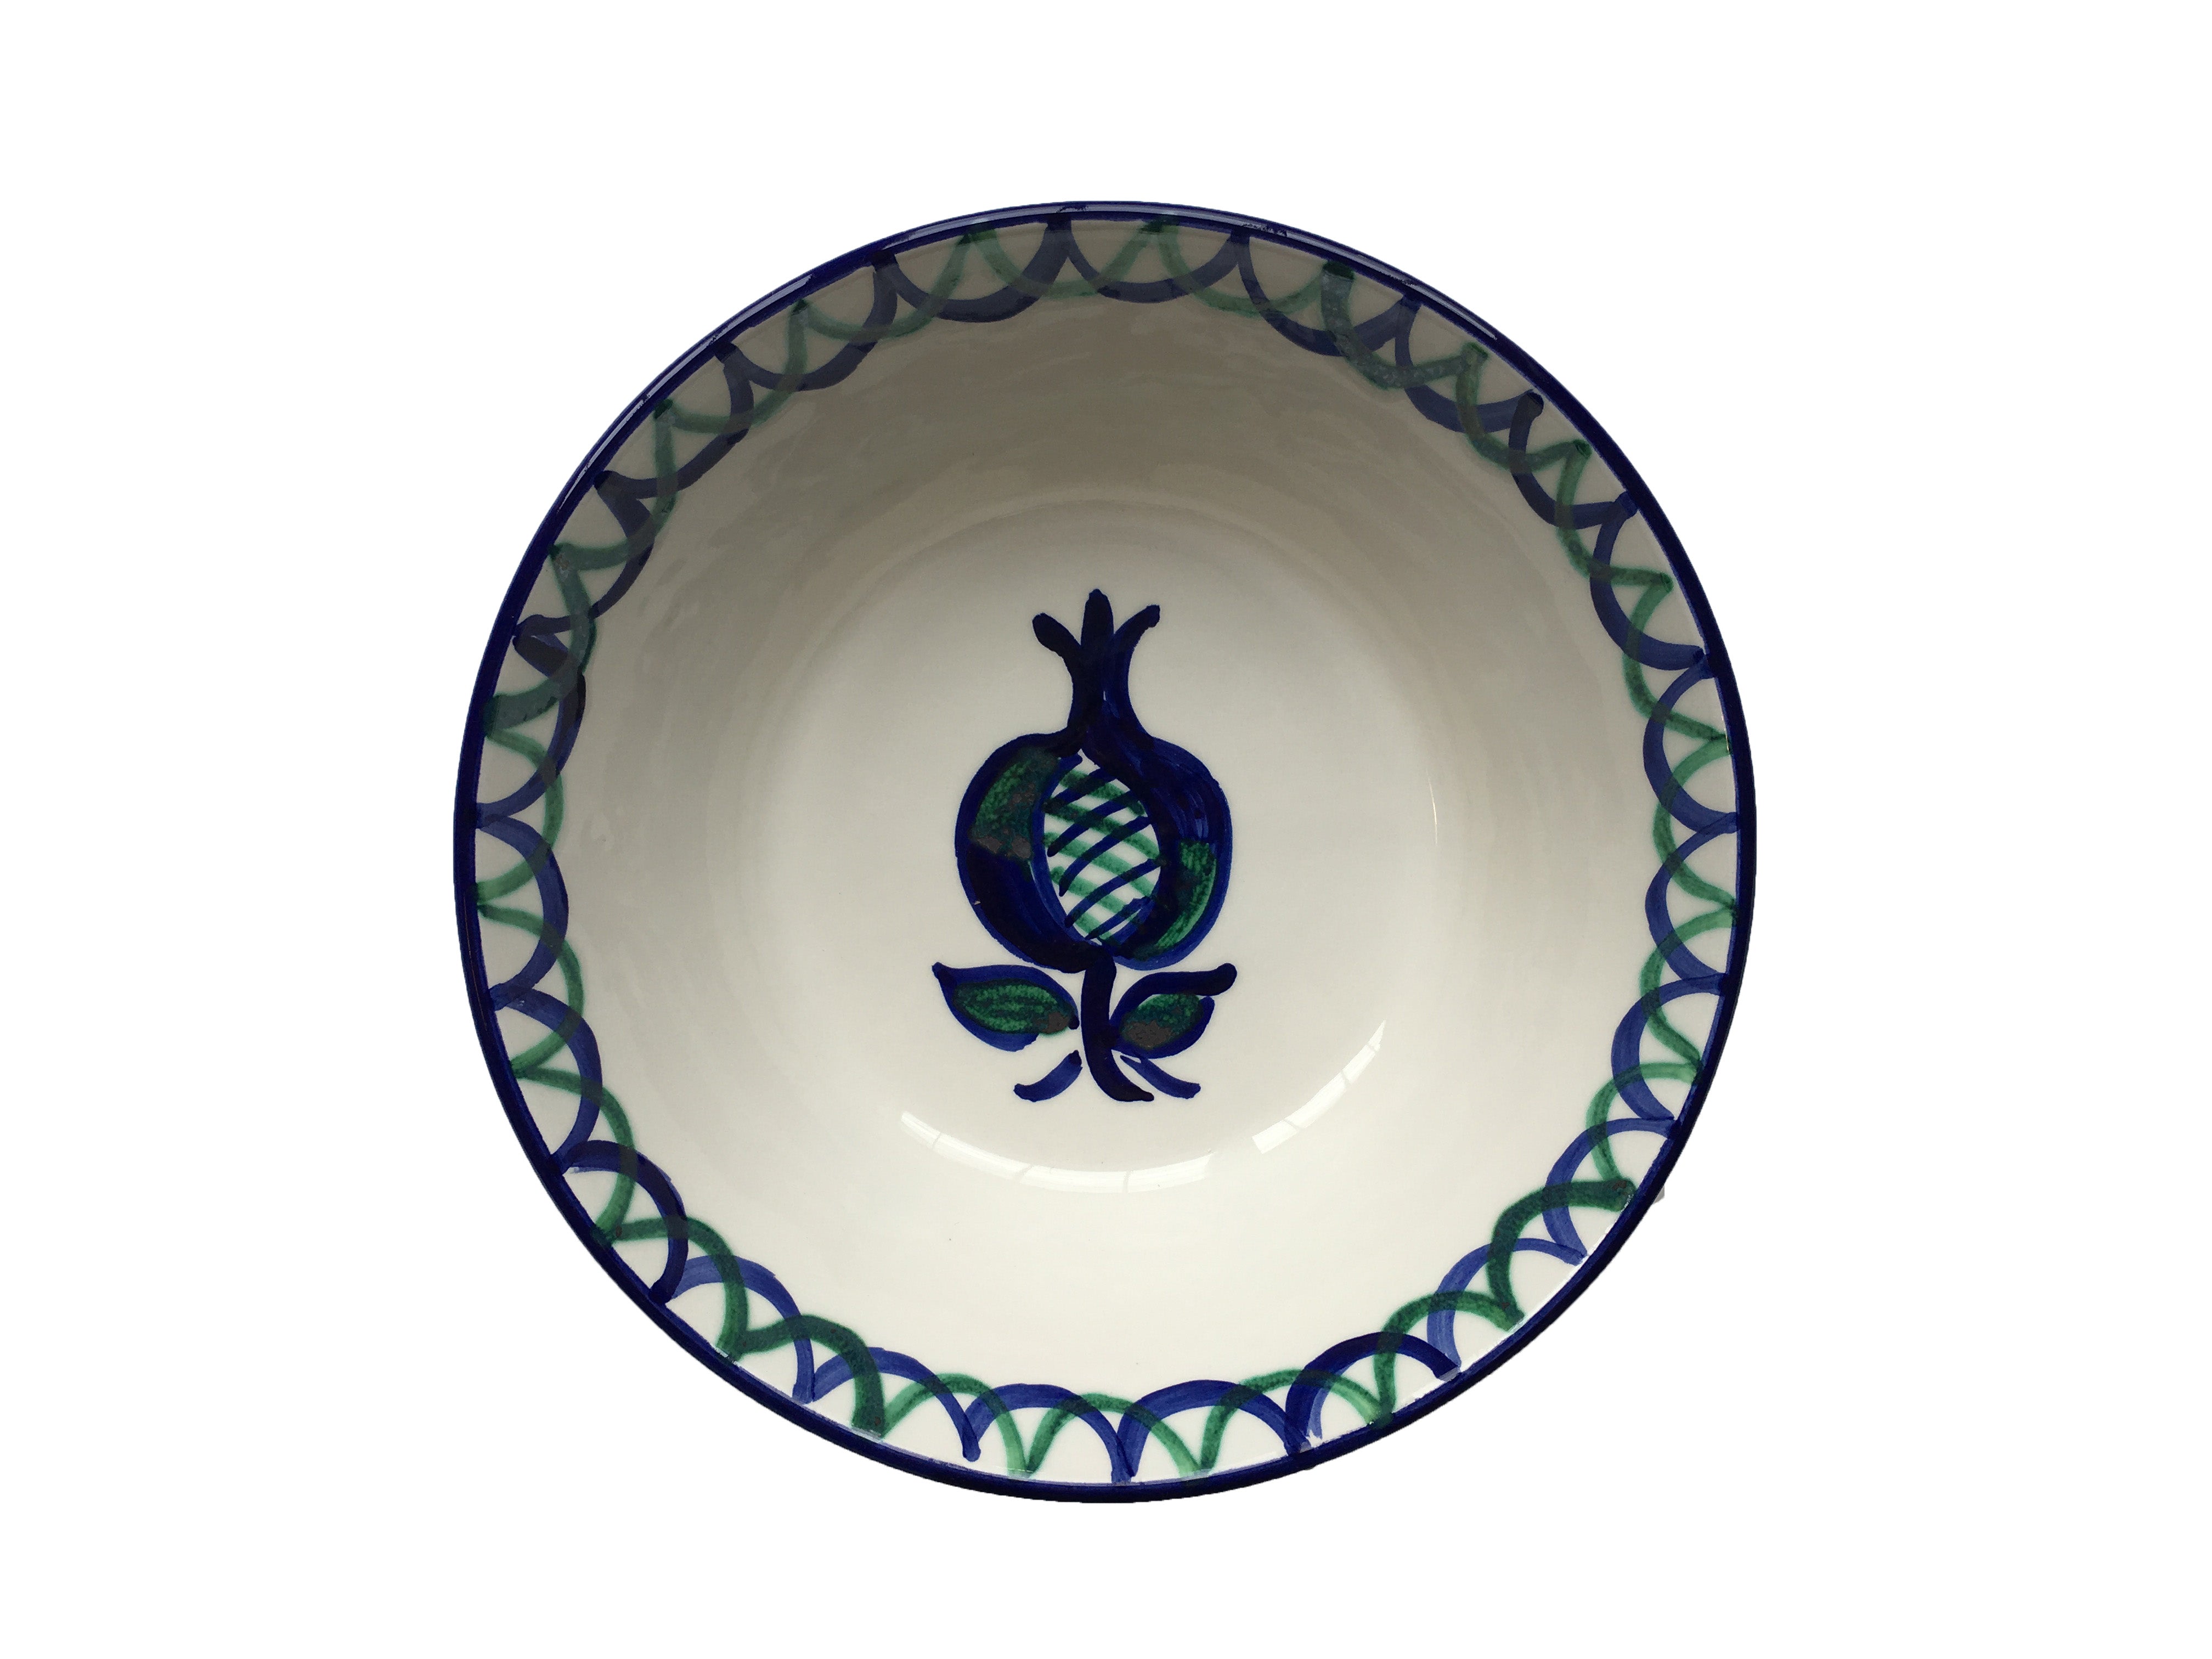 LARGE BOWL (LEBRILLO) - GREEN AND BLUE POMEGRANATE DESIGN WITH SCALLOP DECORATION